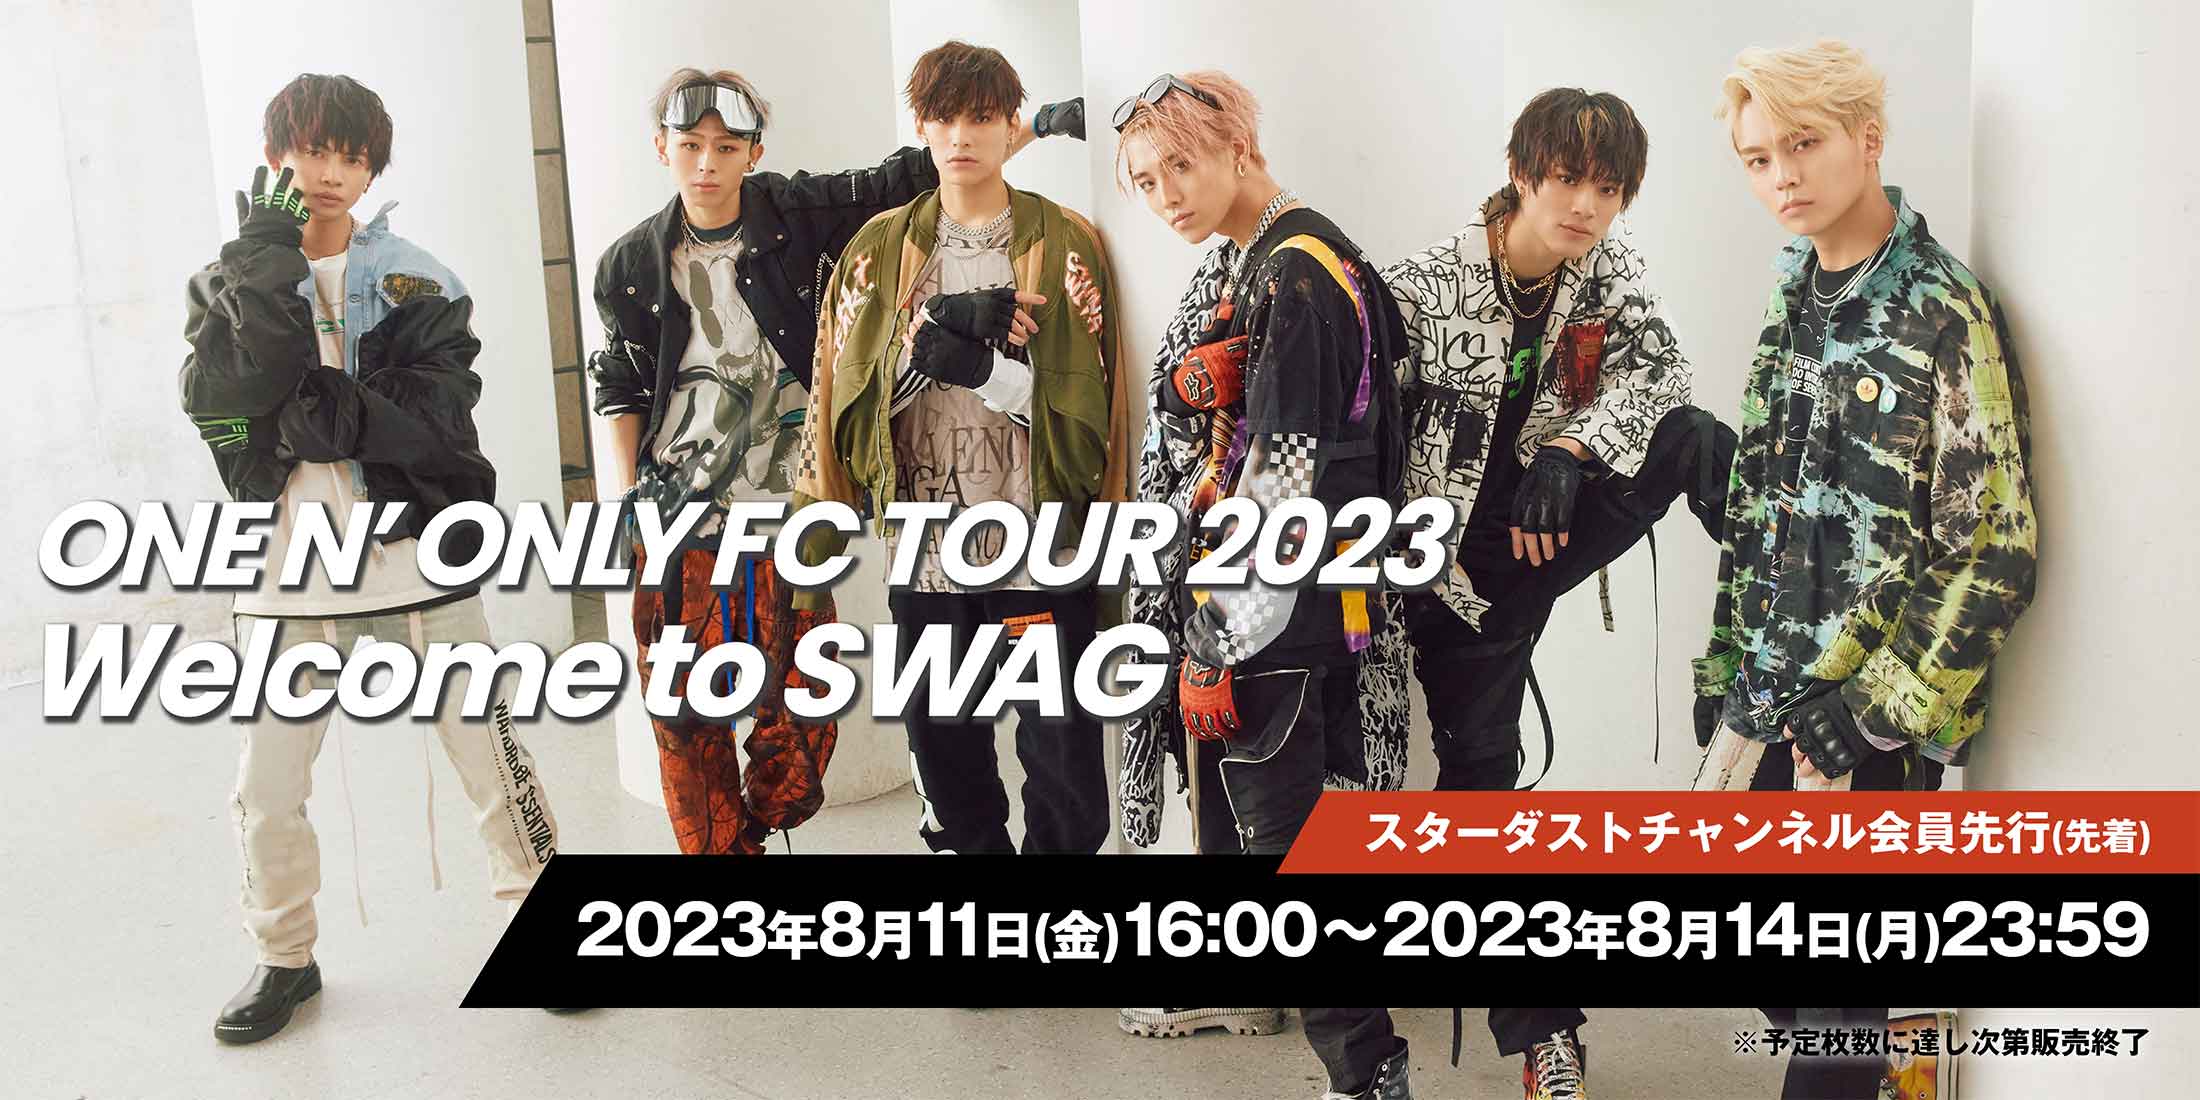 ONE N’ ONLY FC TOUR 2023 ～Welcome to SWAG～チケット先行